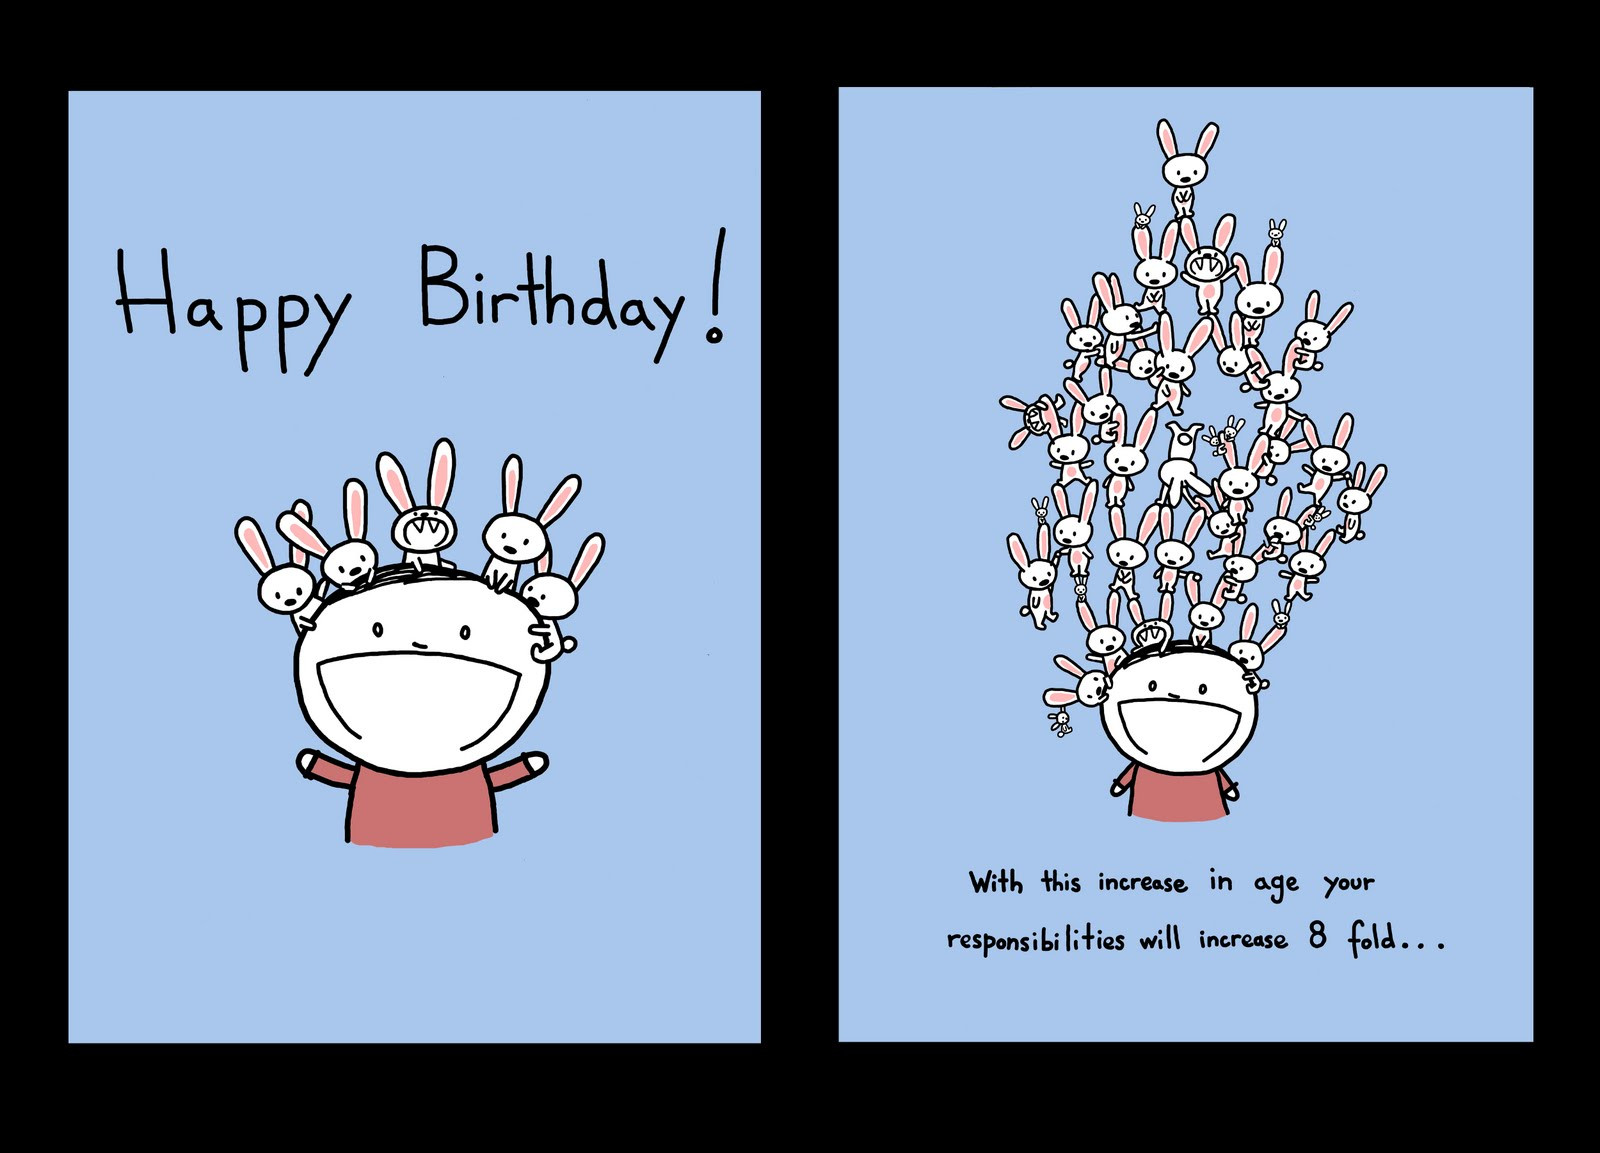 the-top-22-ideas-about-funny-birthday-cards-for-him-home-family-style-and-art-ideas